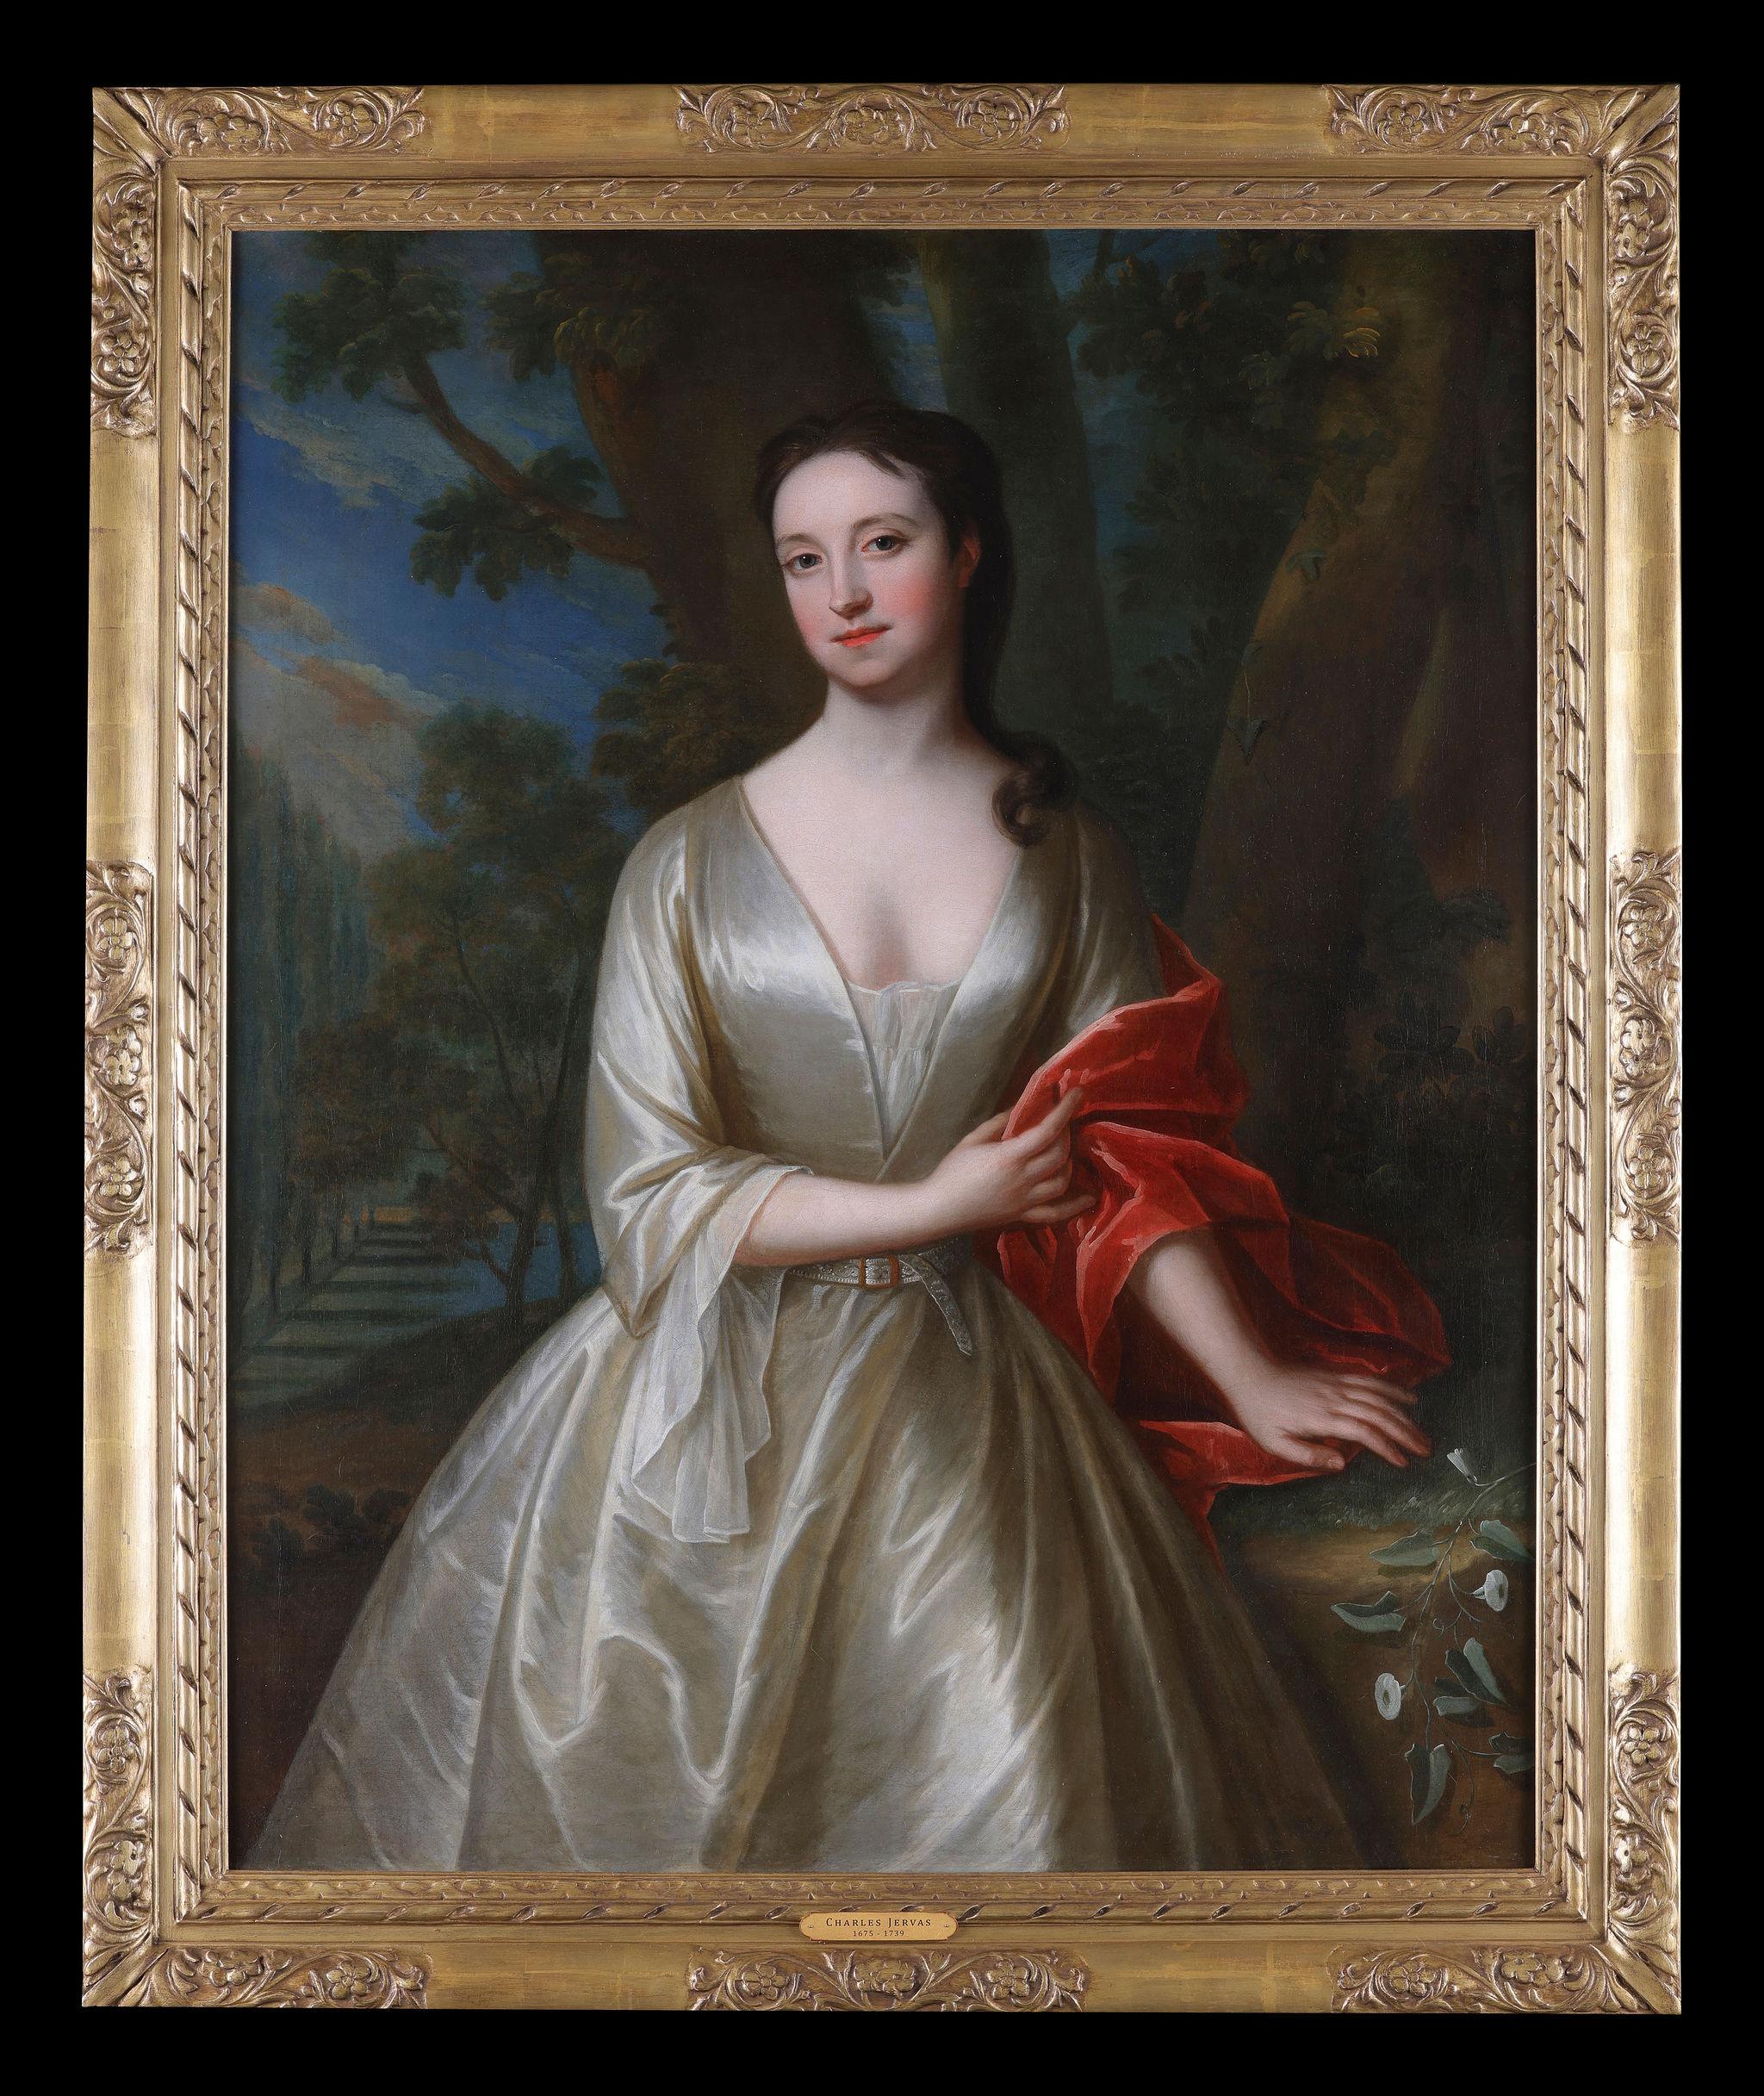 Portrait of a Lady possibly Frances Thynne, Lady Worsley 1673-1750 Oil on canvas